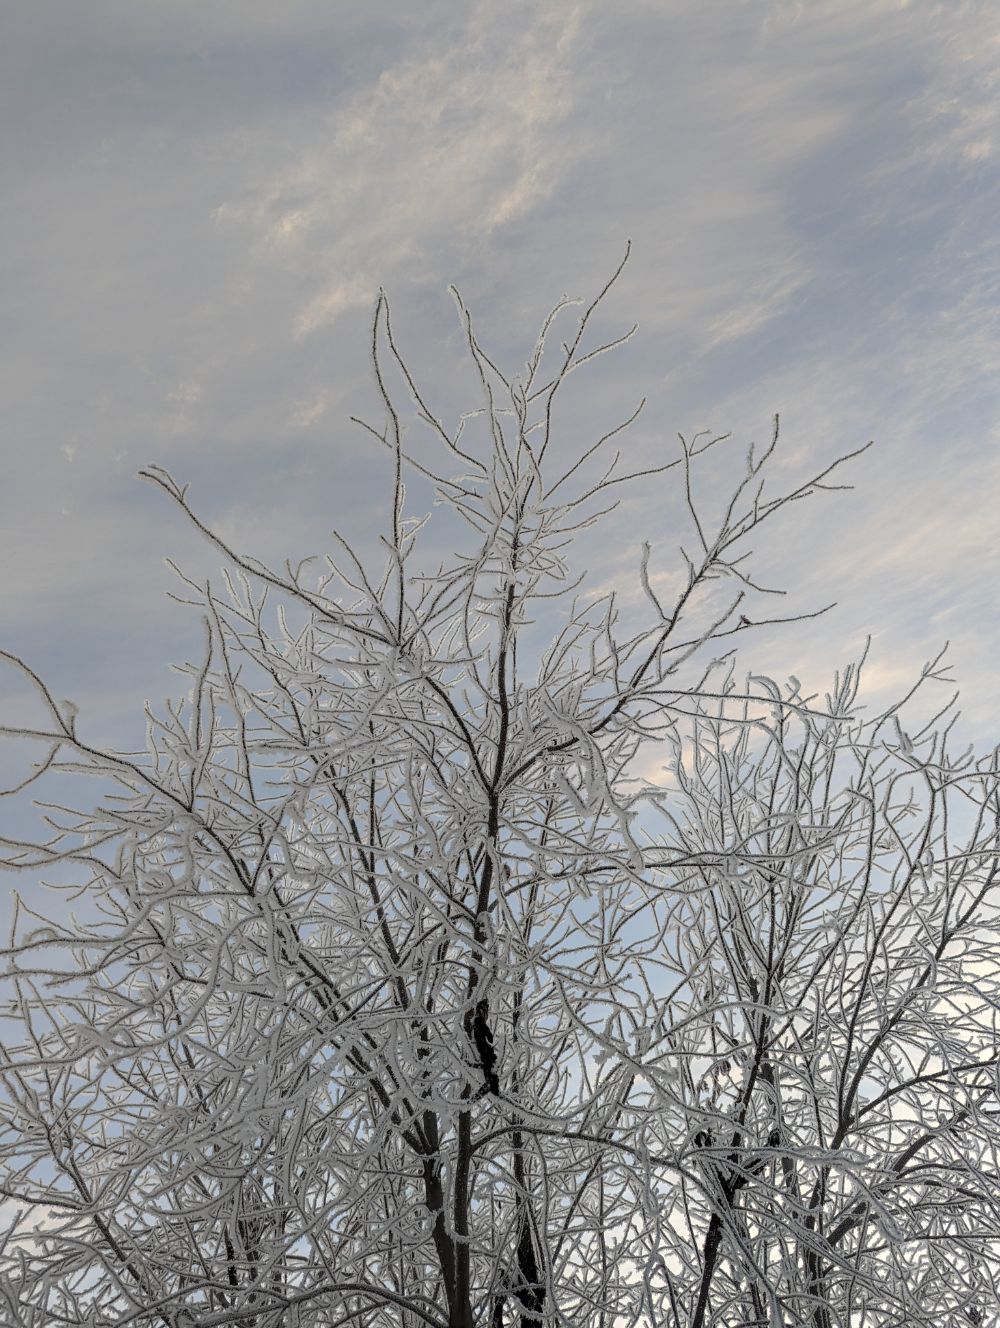 A picture of a tree taken upward from the ground with the morning sky in the background.  The branches are covered in a thick layer of hoar frost.